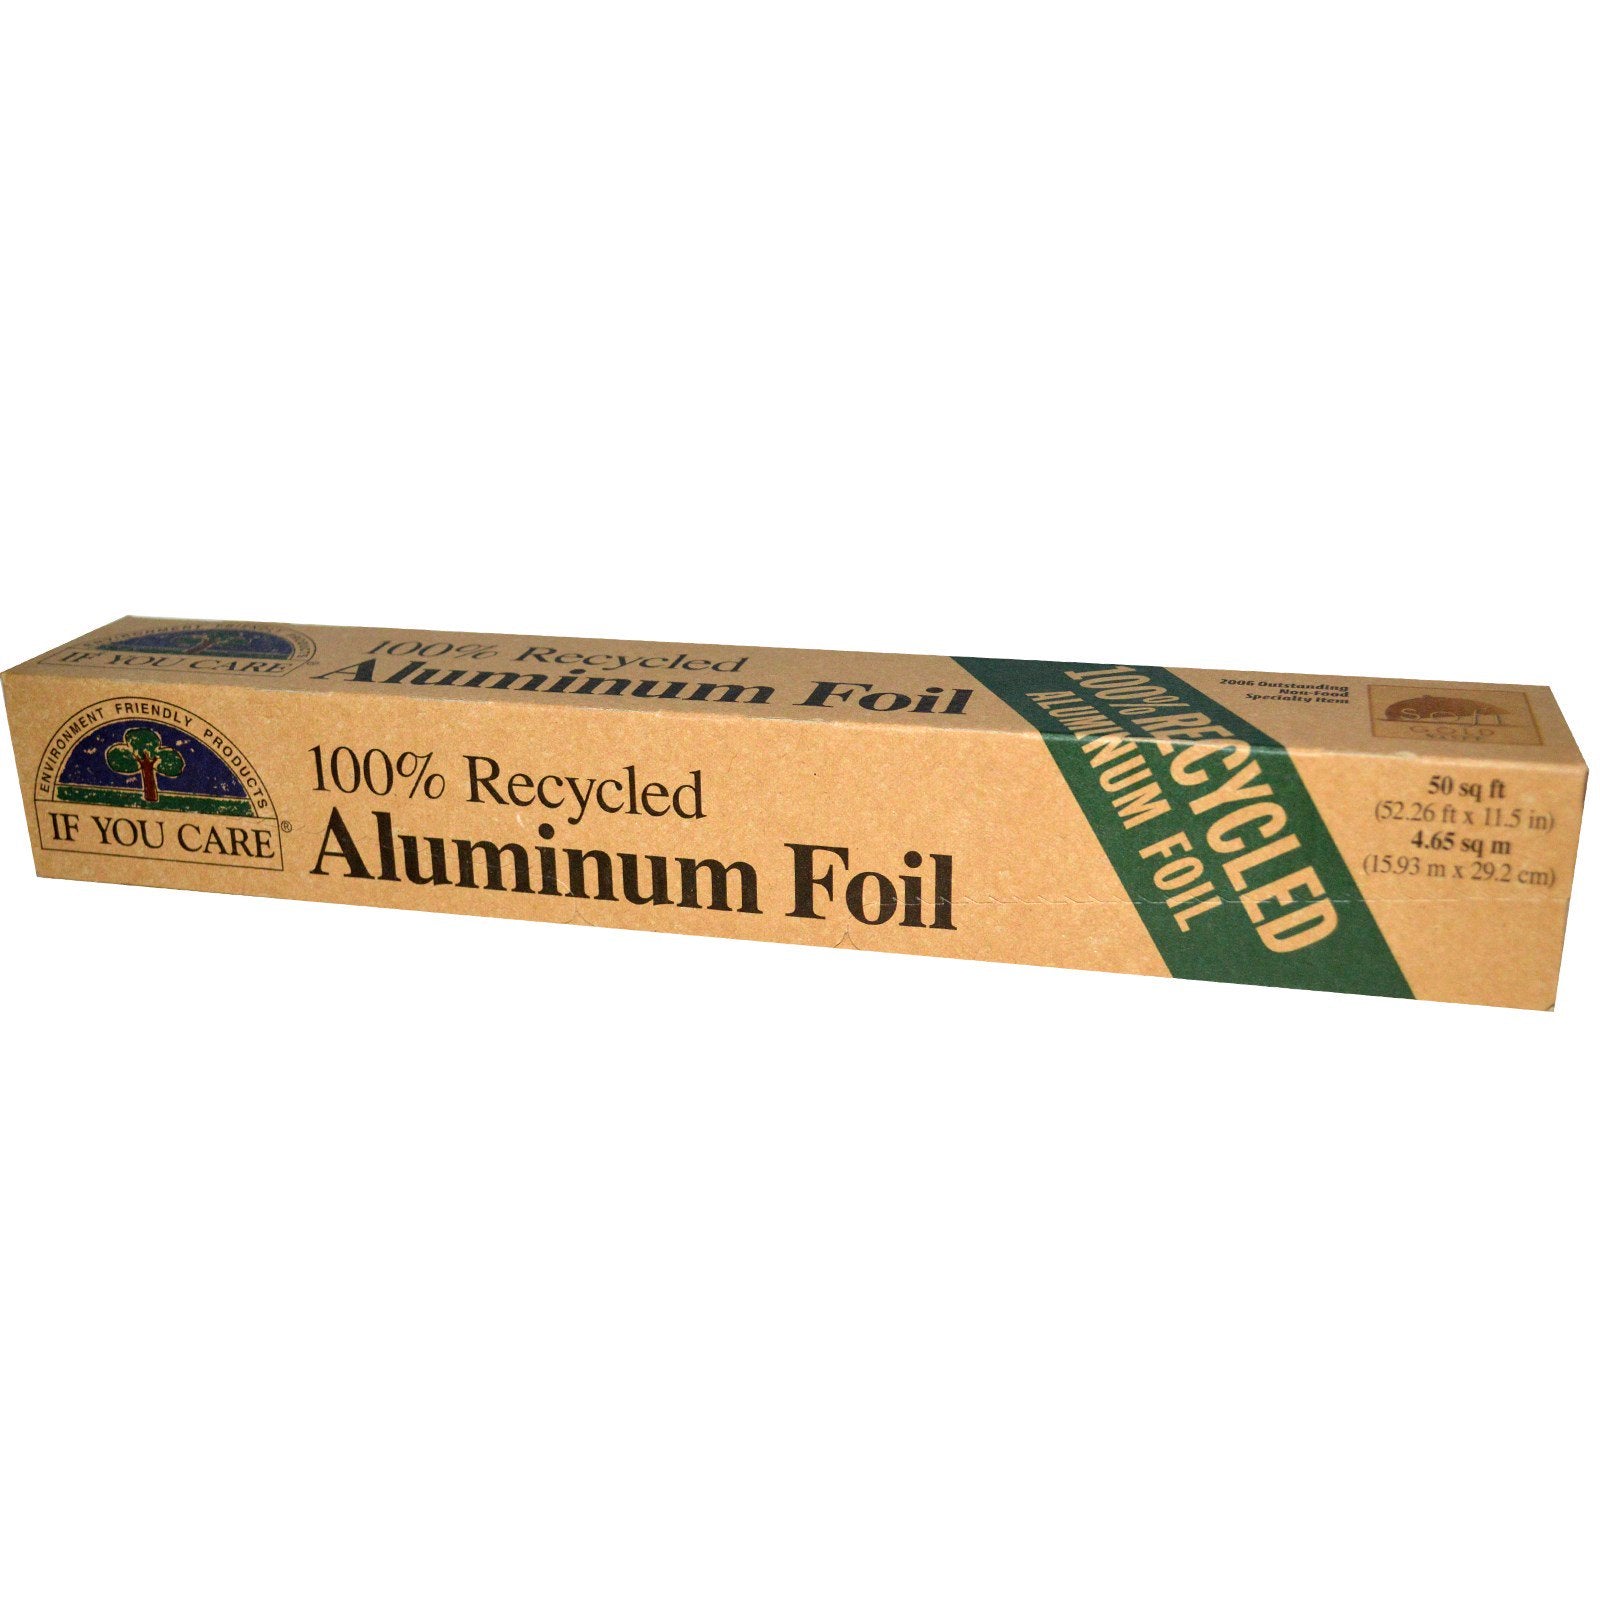 50 Sq Fair Trade 100% Recycled Aluminum Foil at Whole Foods Market